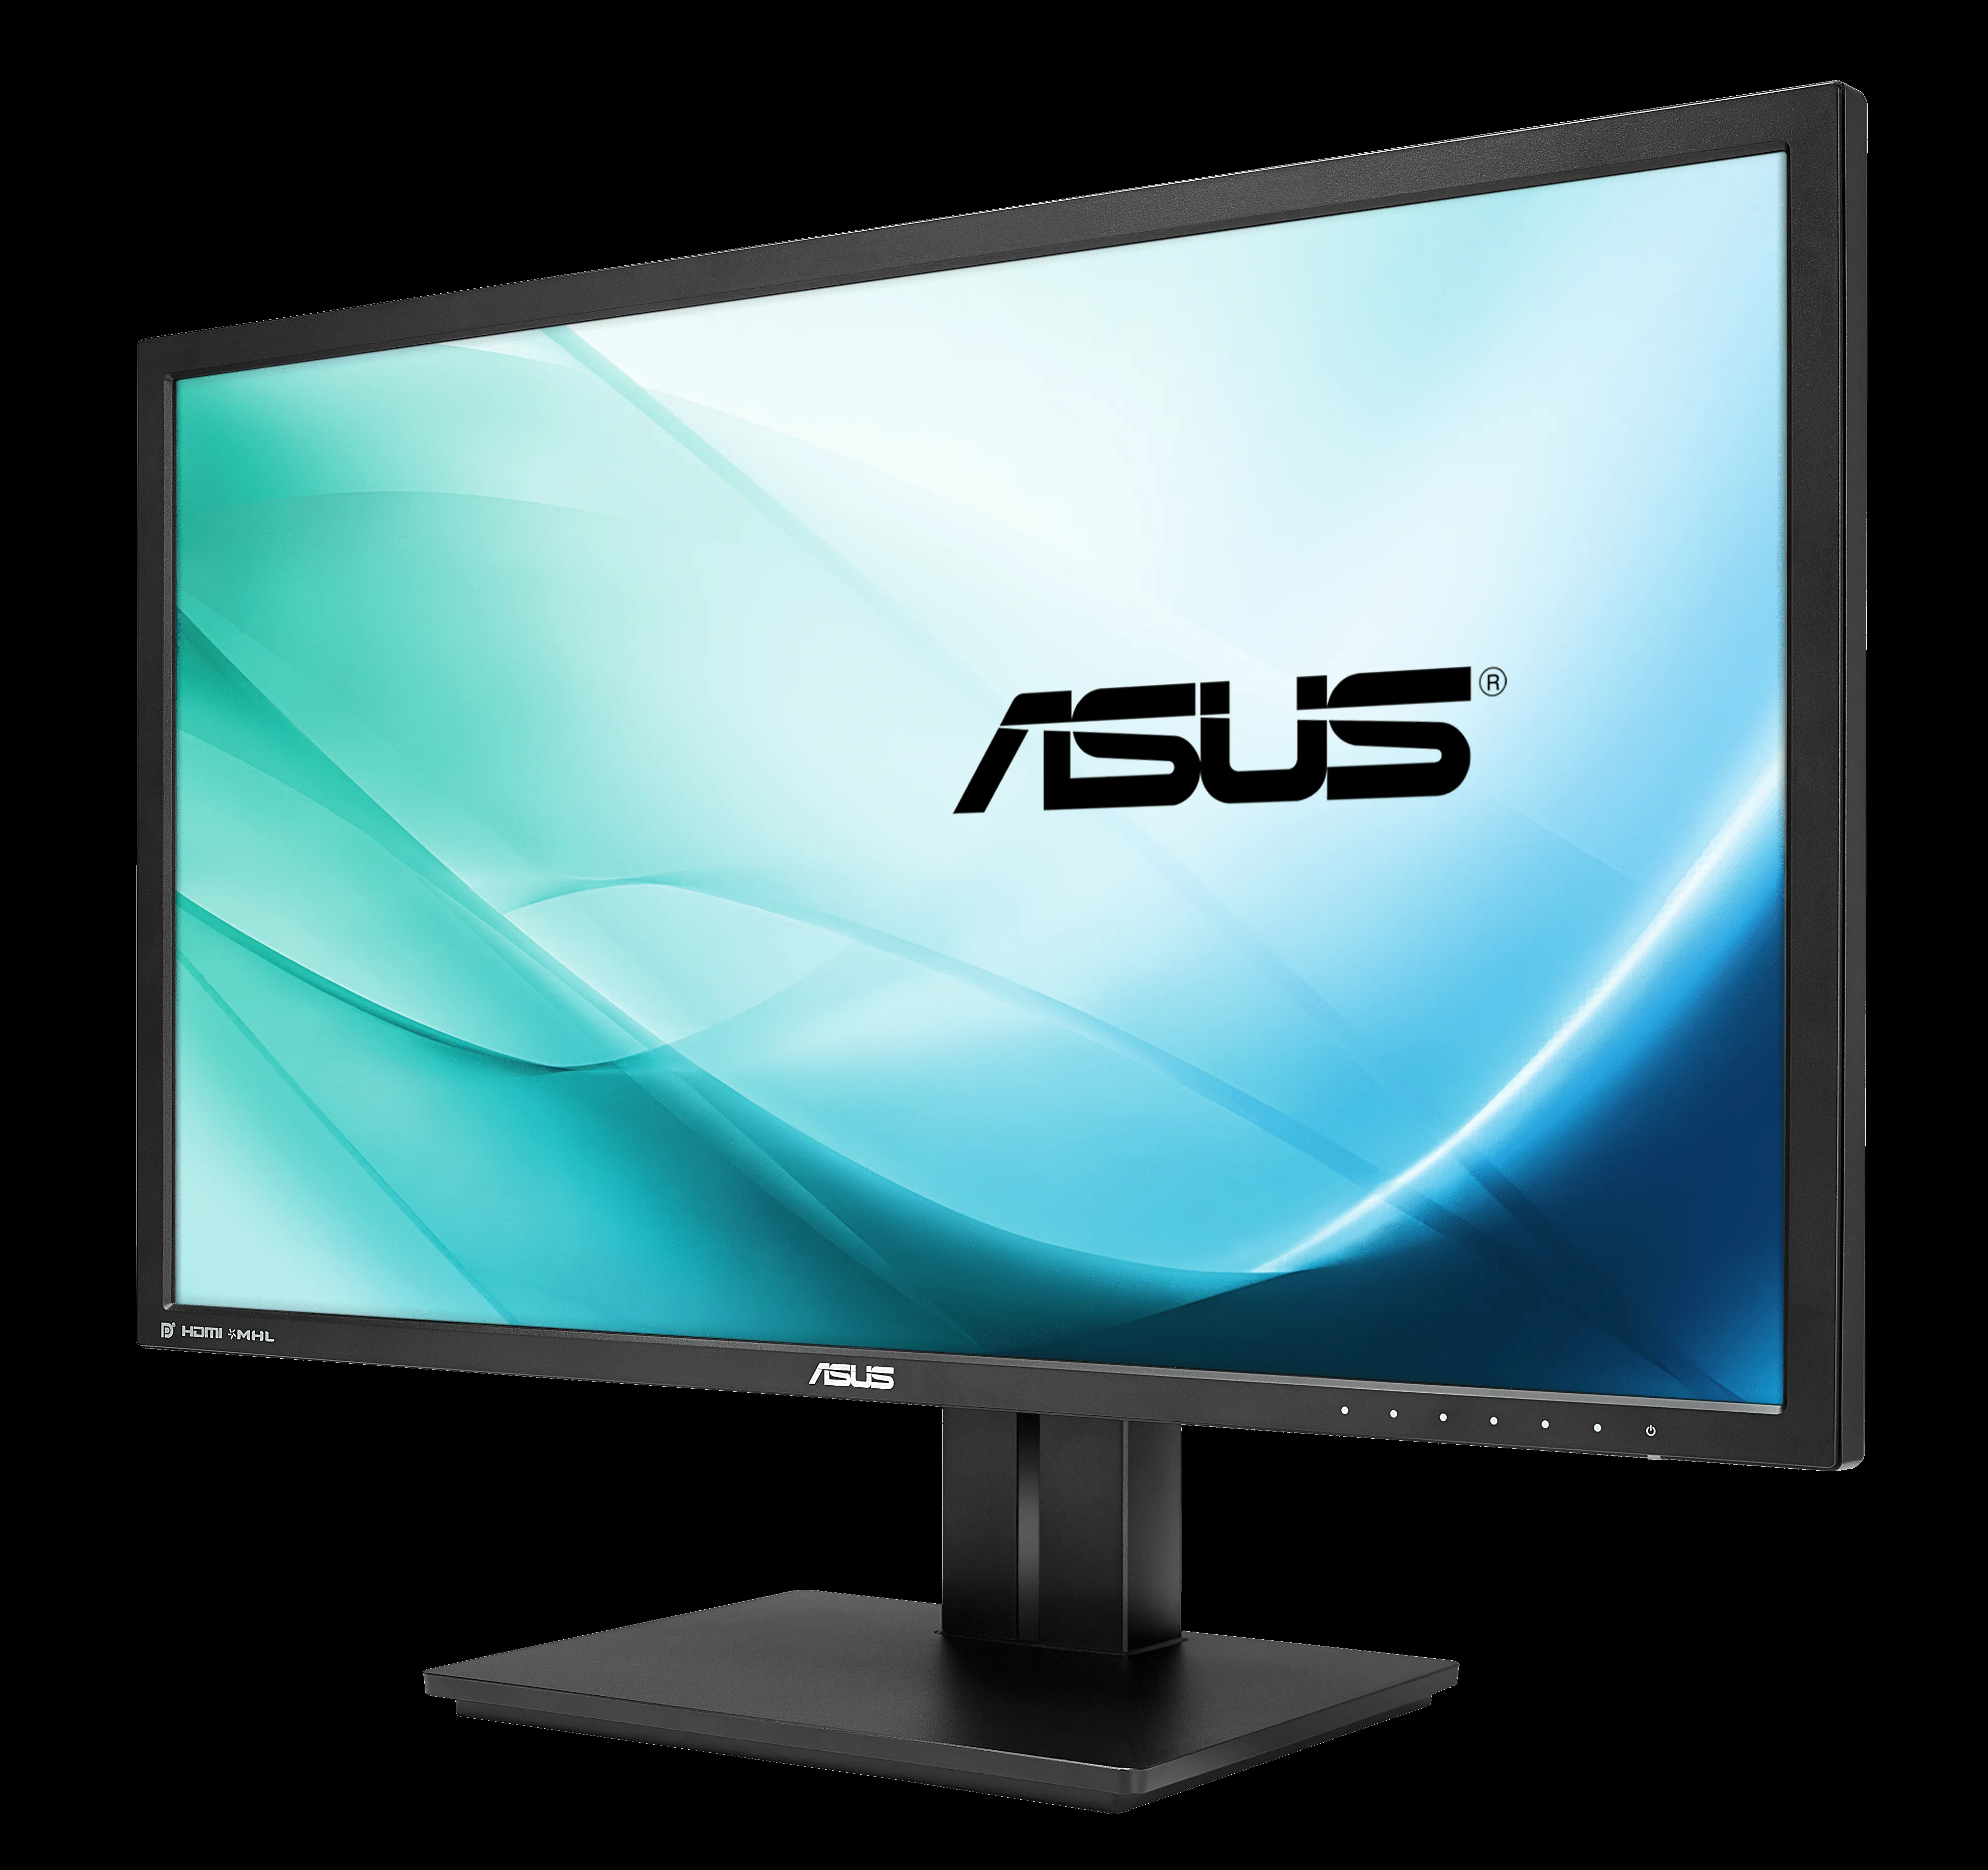 Asus shows off WQHD gaming monitor and jumps into the 4K display ...